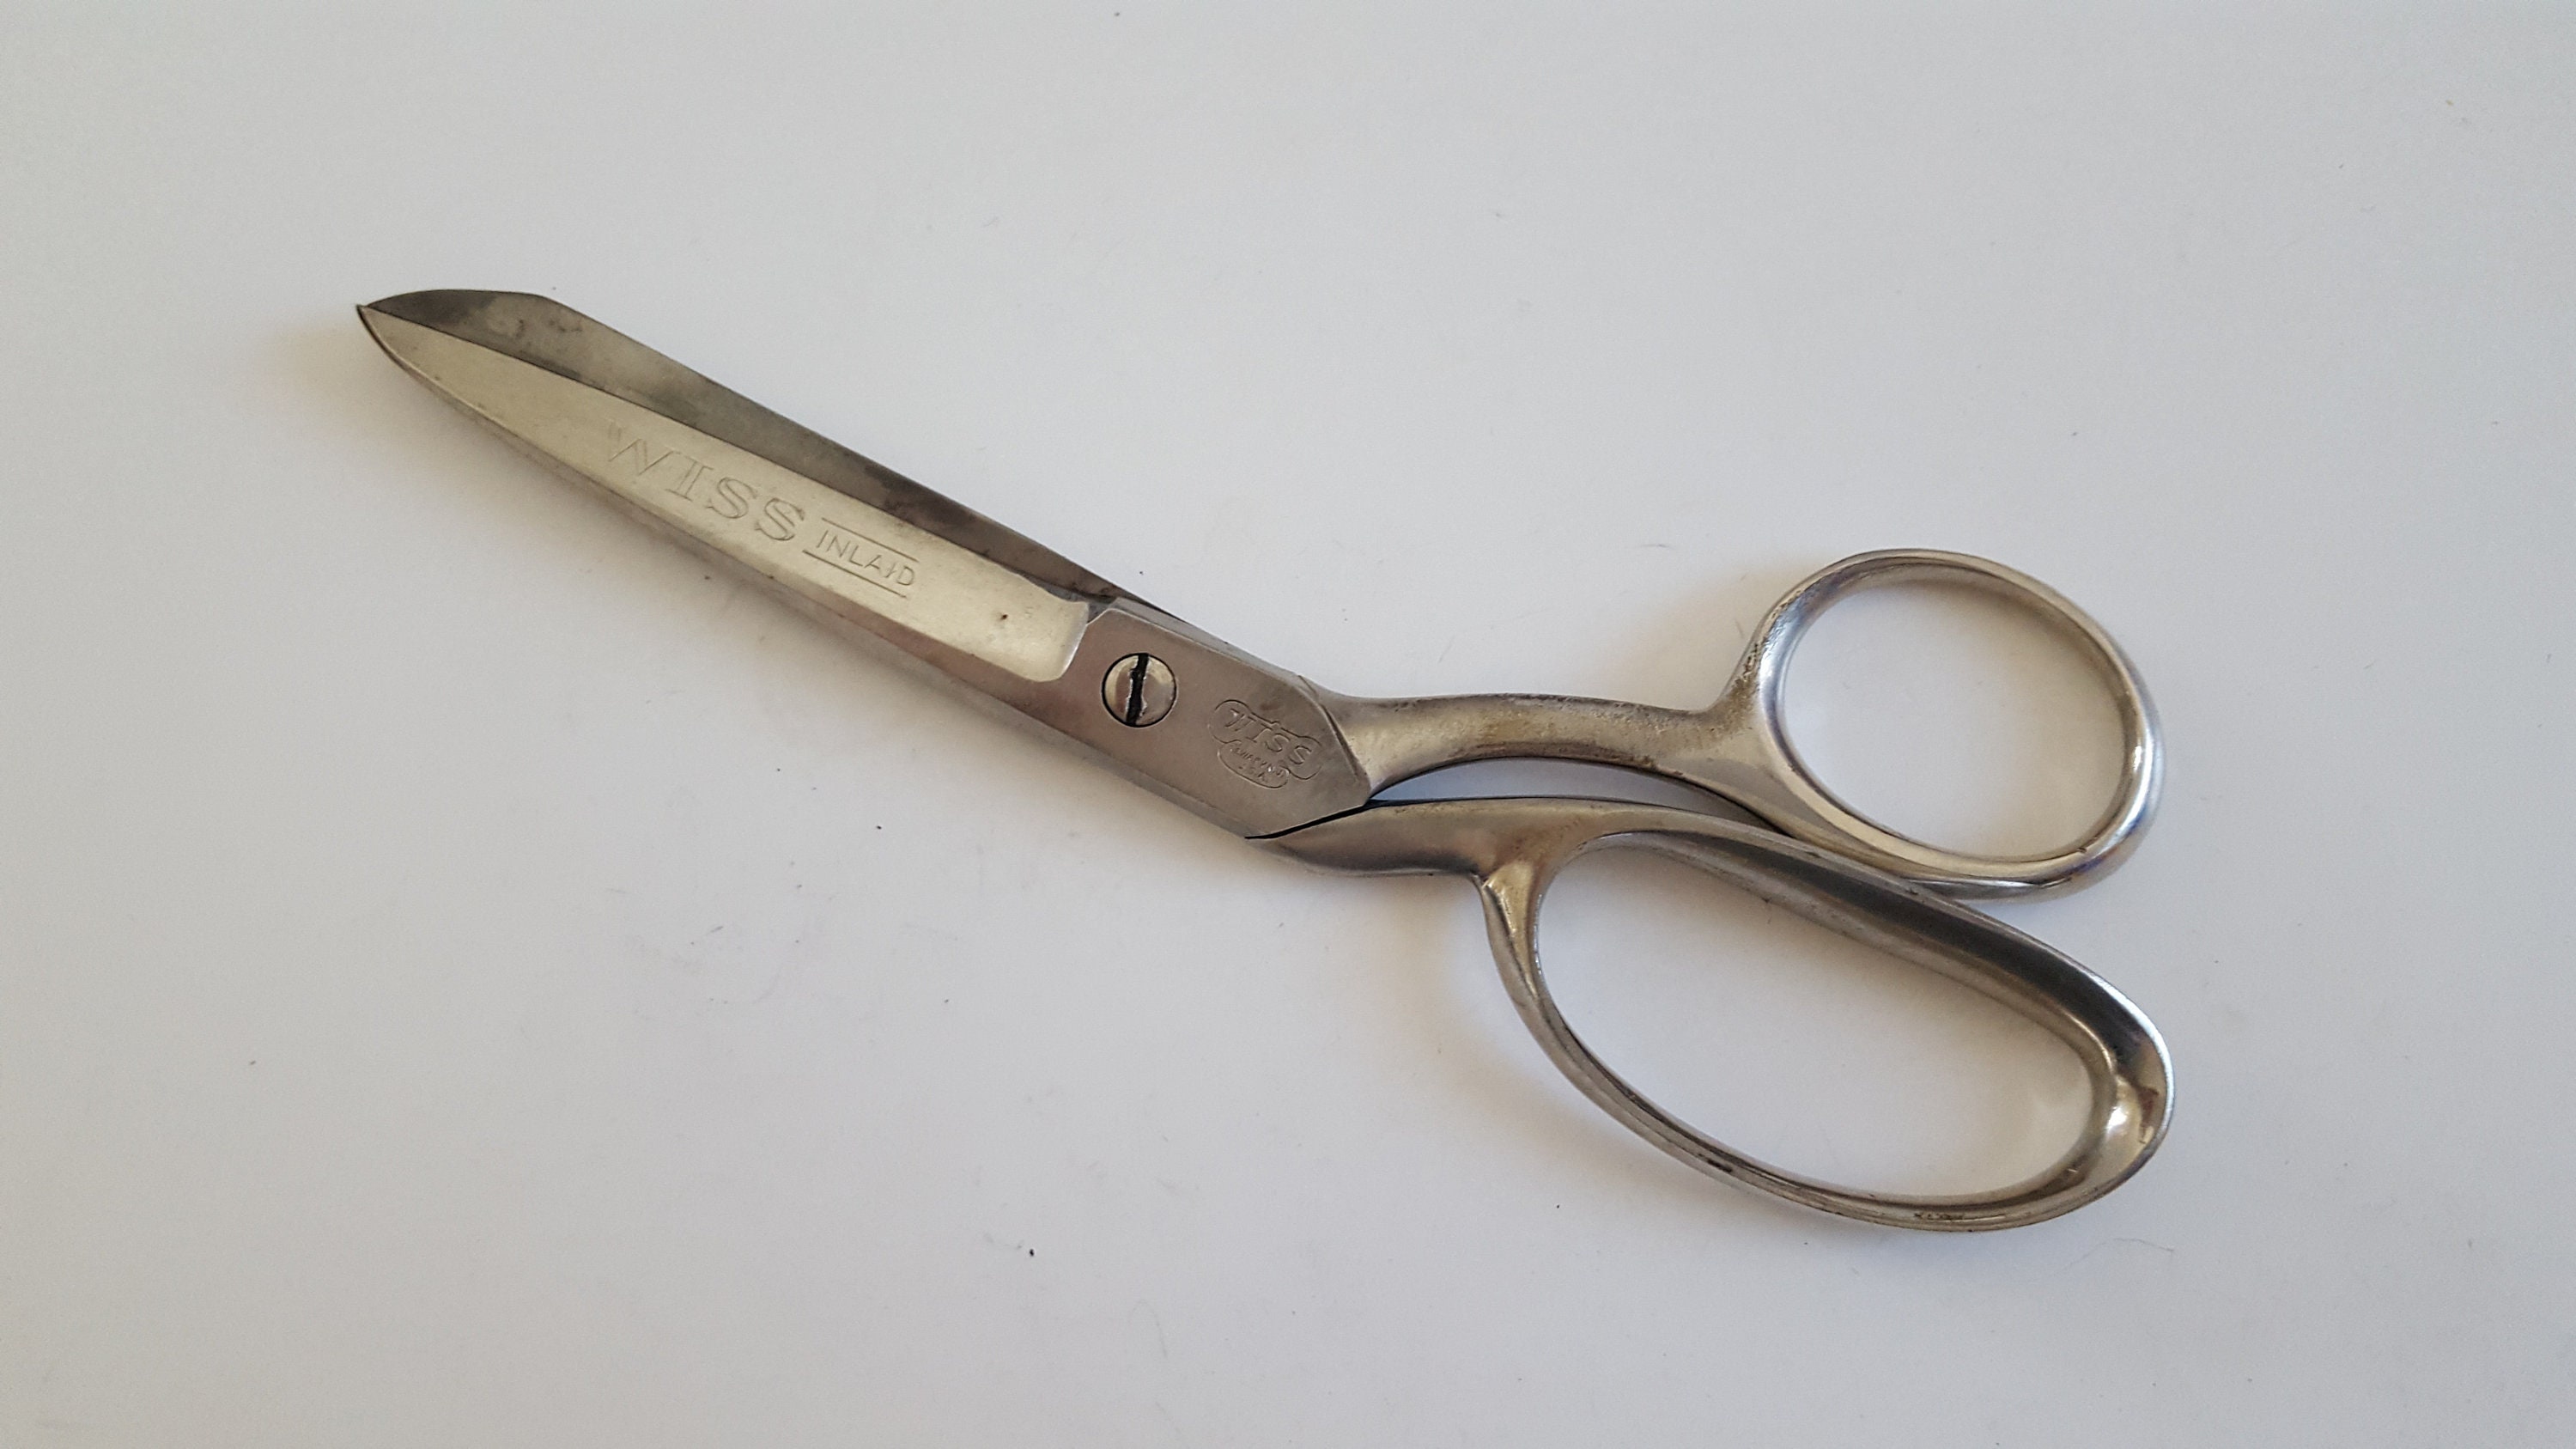 Vintage WISS Steel Forged Inlaid 8 Scissors/shears No.138, Sewing, Crafts 